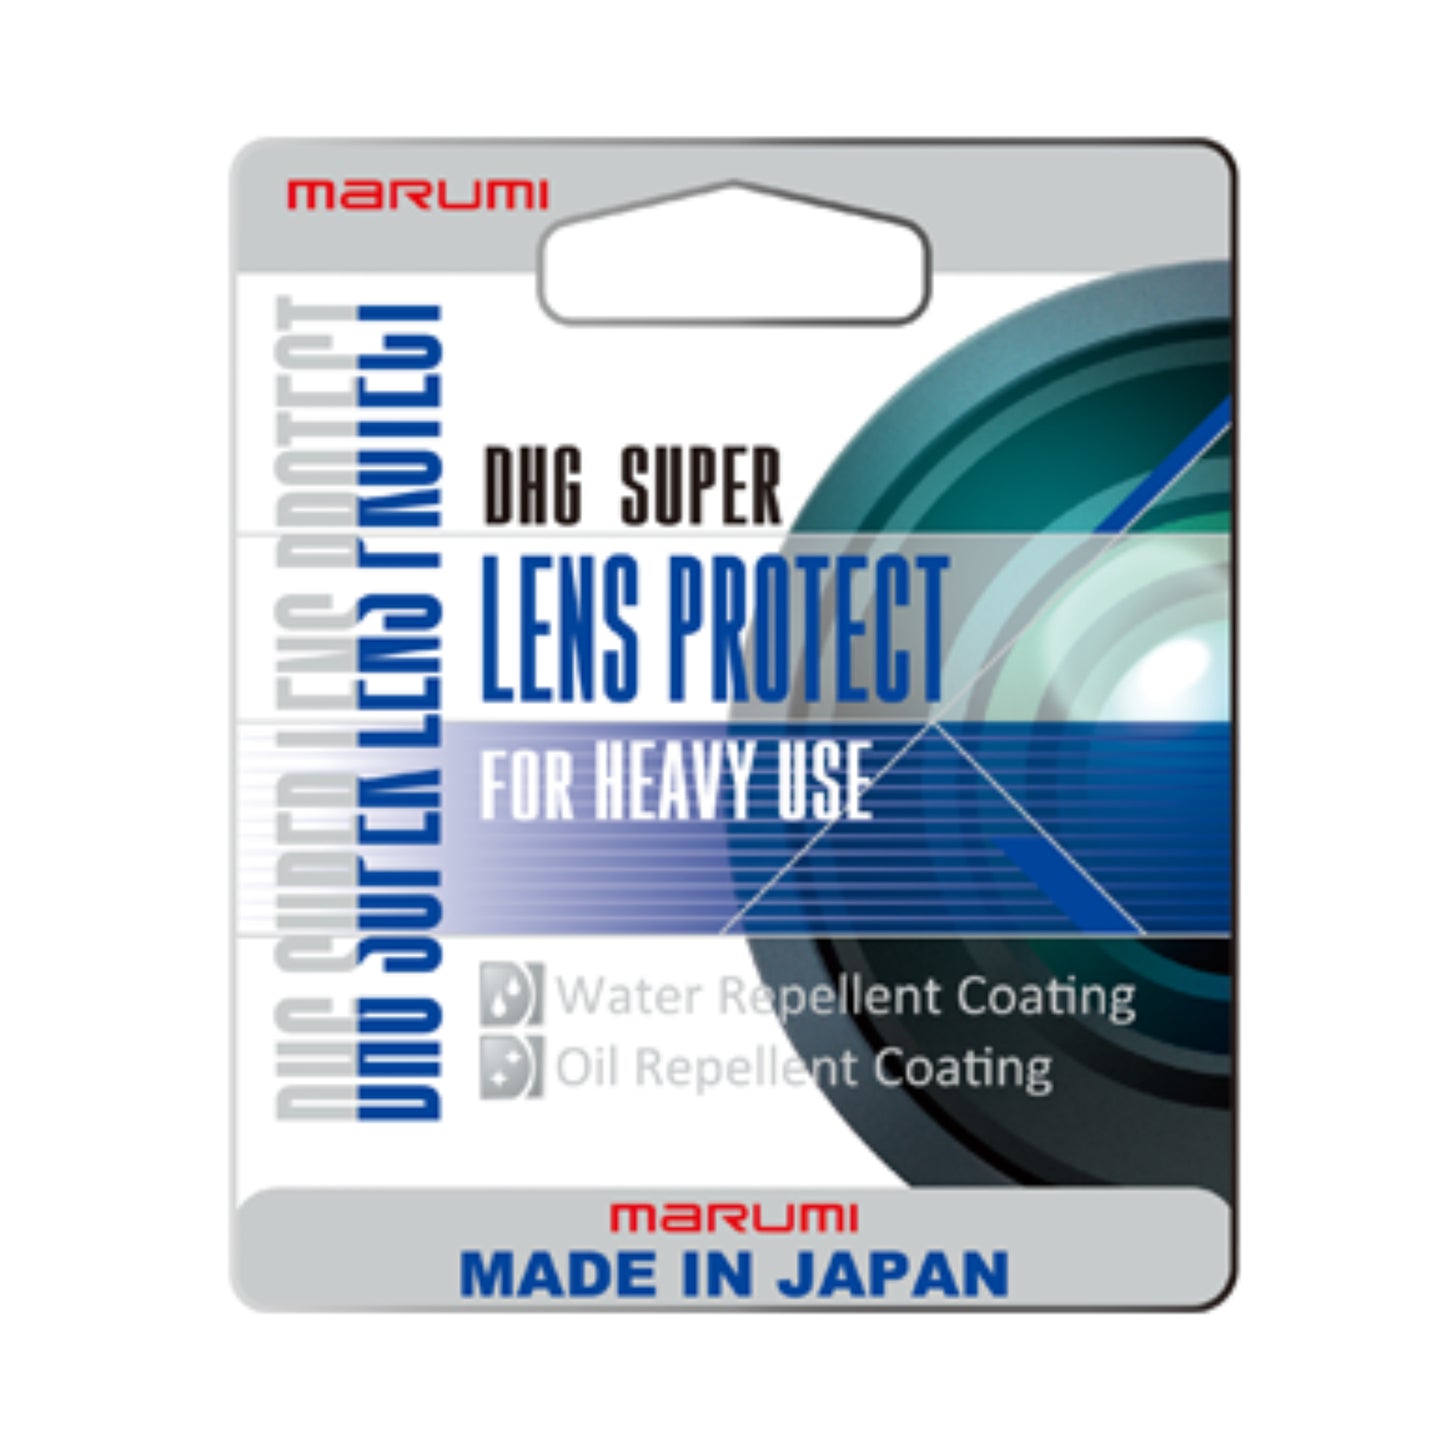 Buy Marumi Dhg Super Lens Protect Filter | Topic Store